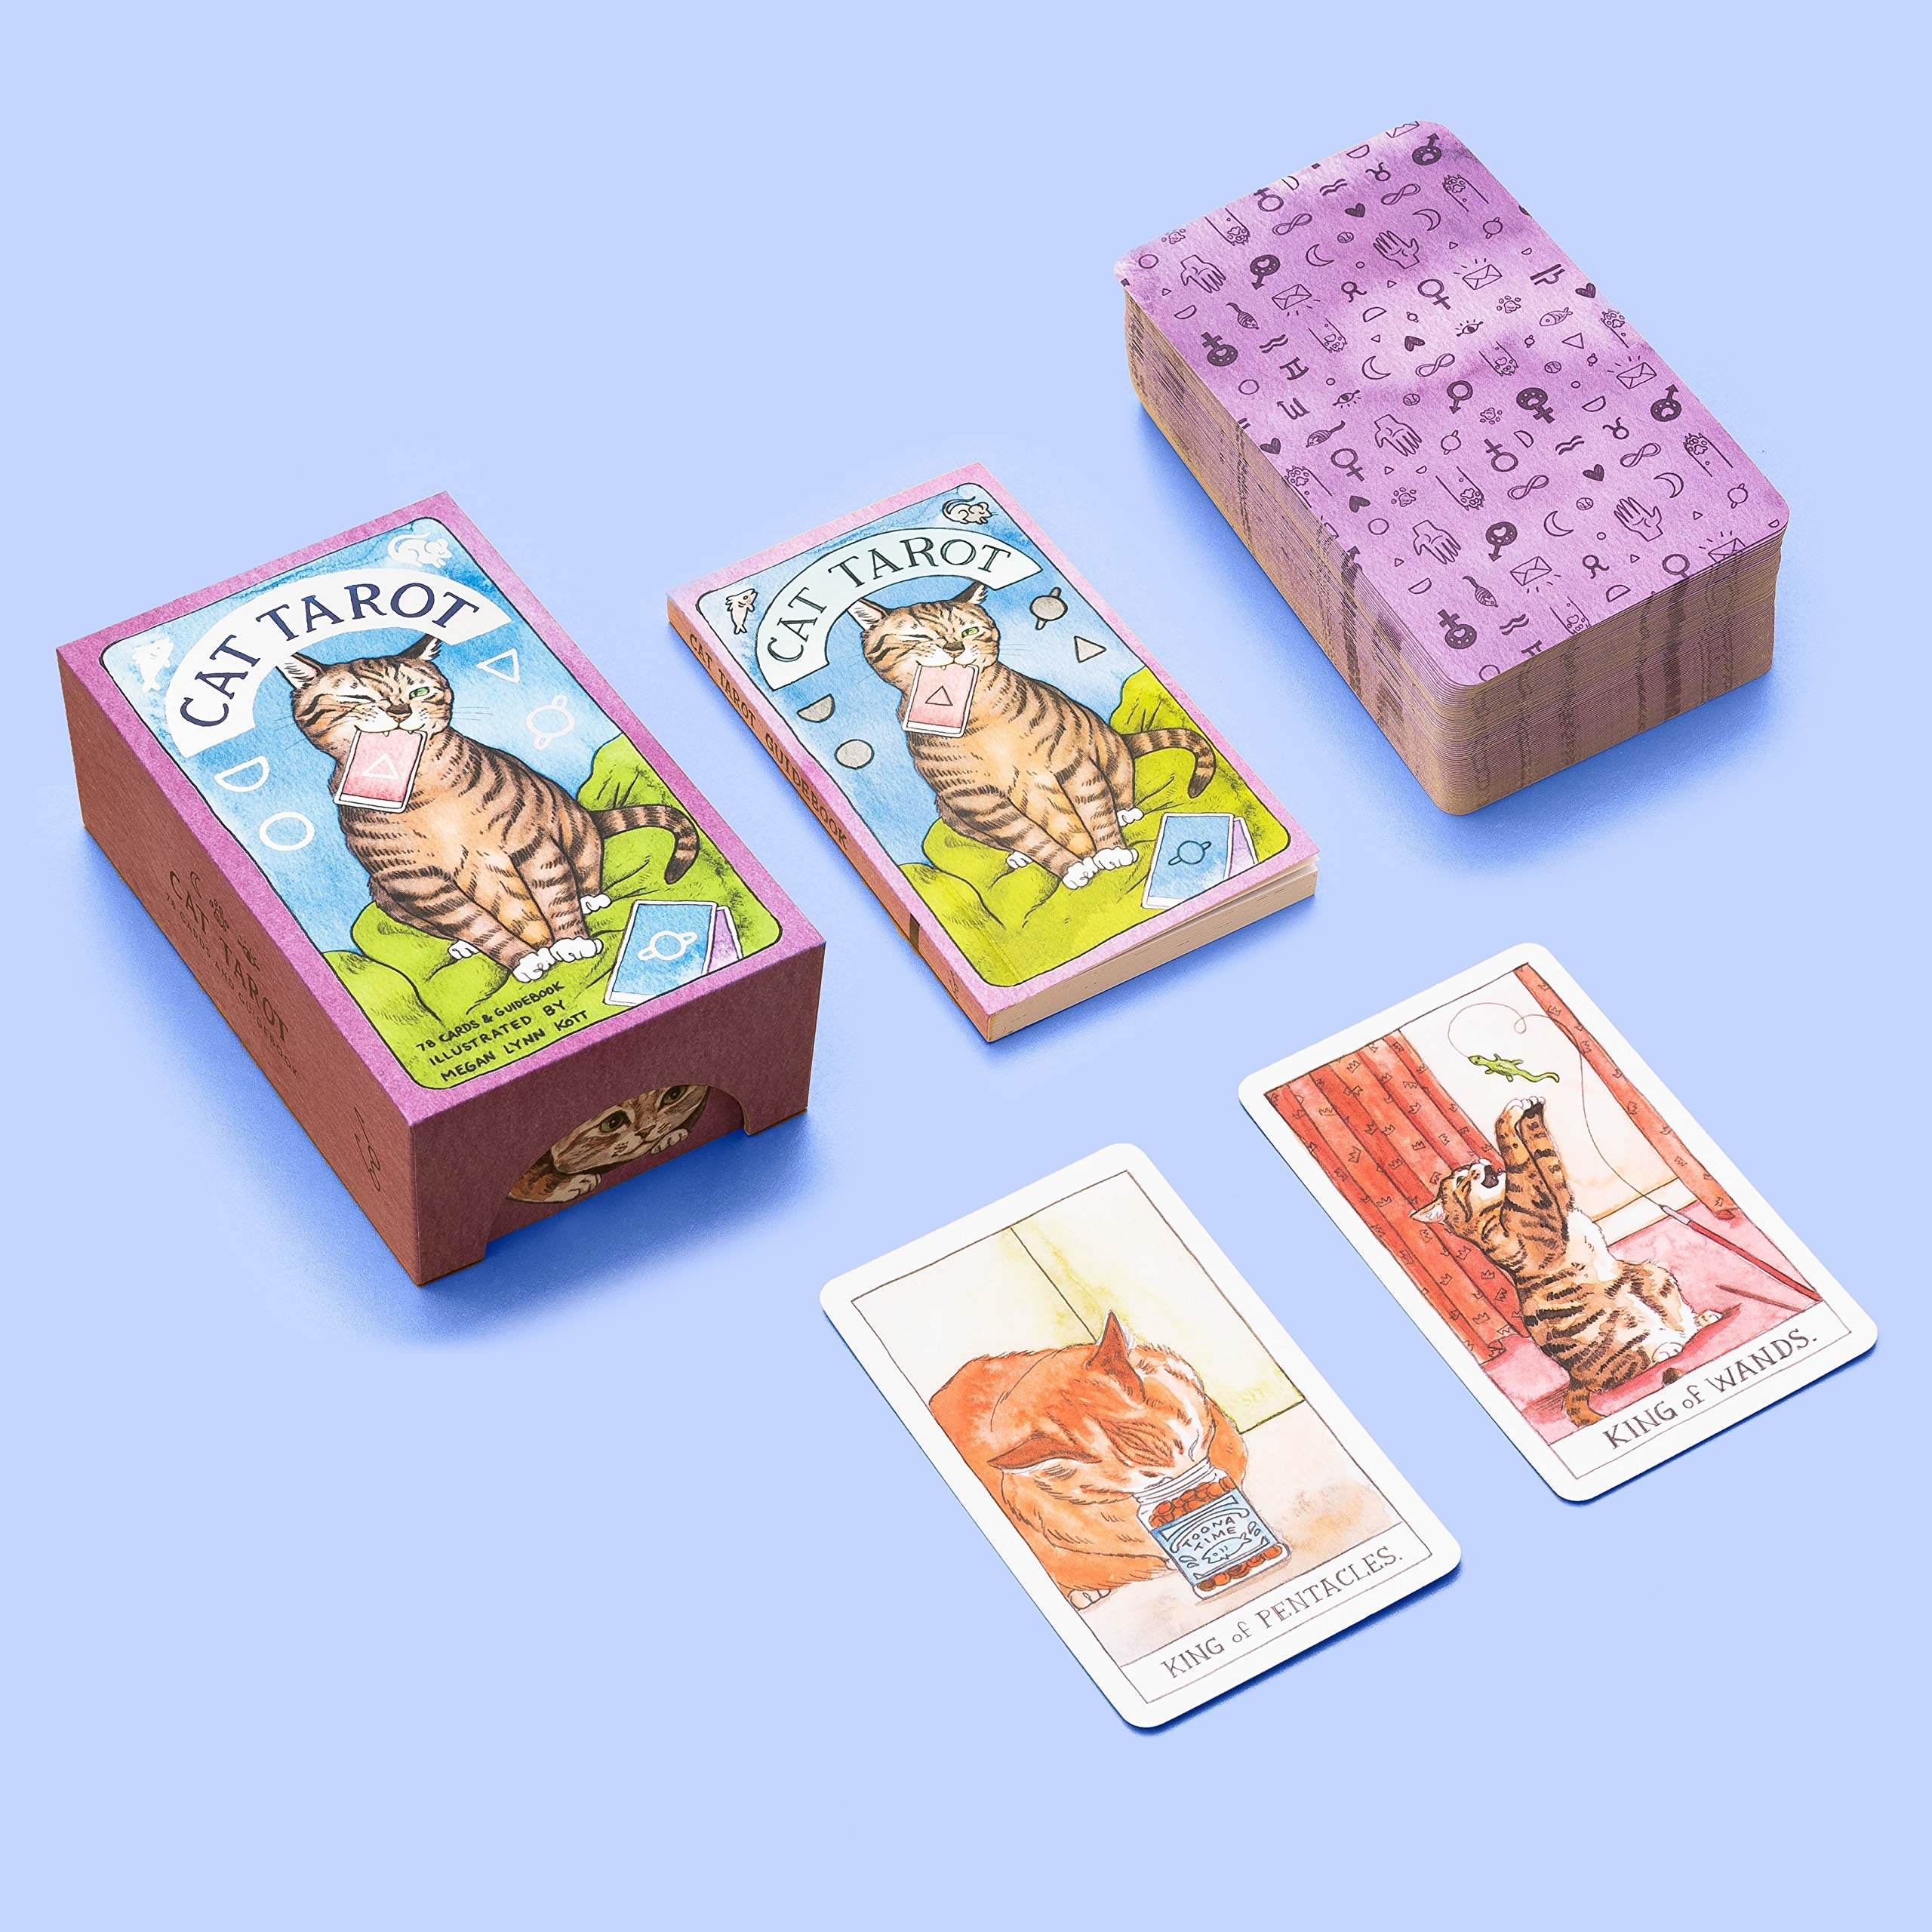 The deck of cards with illustrations featuring cats